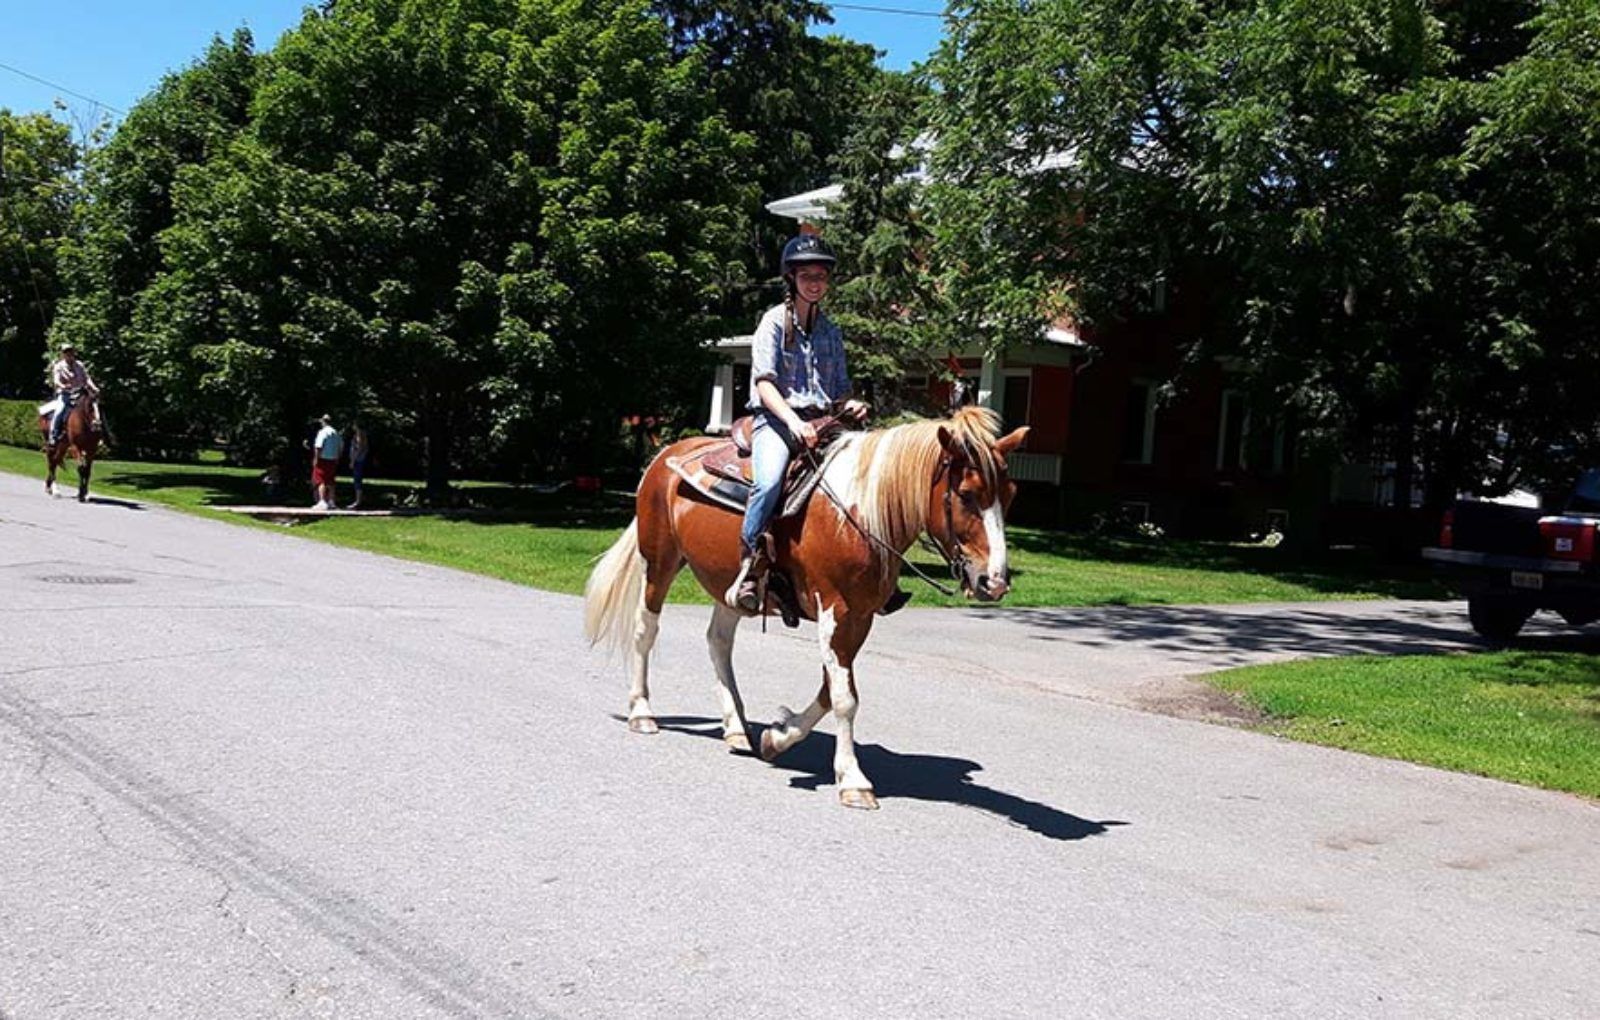 LS_July 10 2019 Horse and Buggy Parade (88)